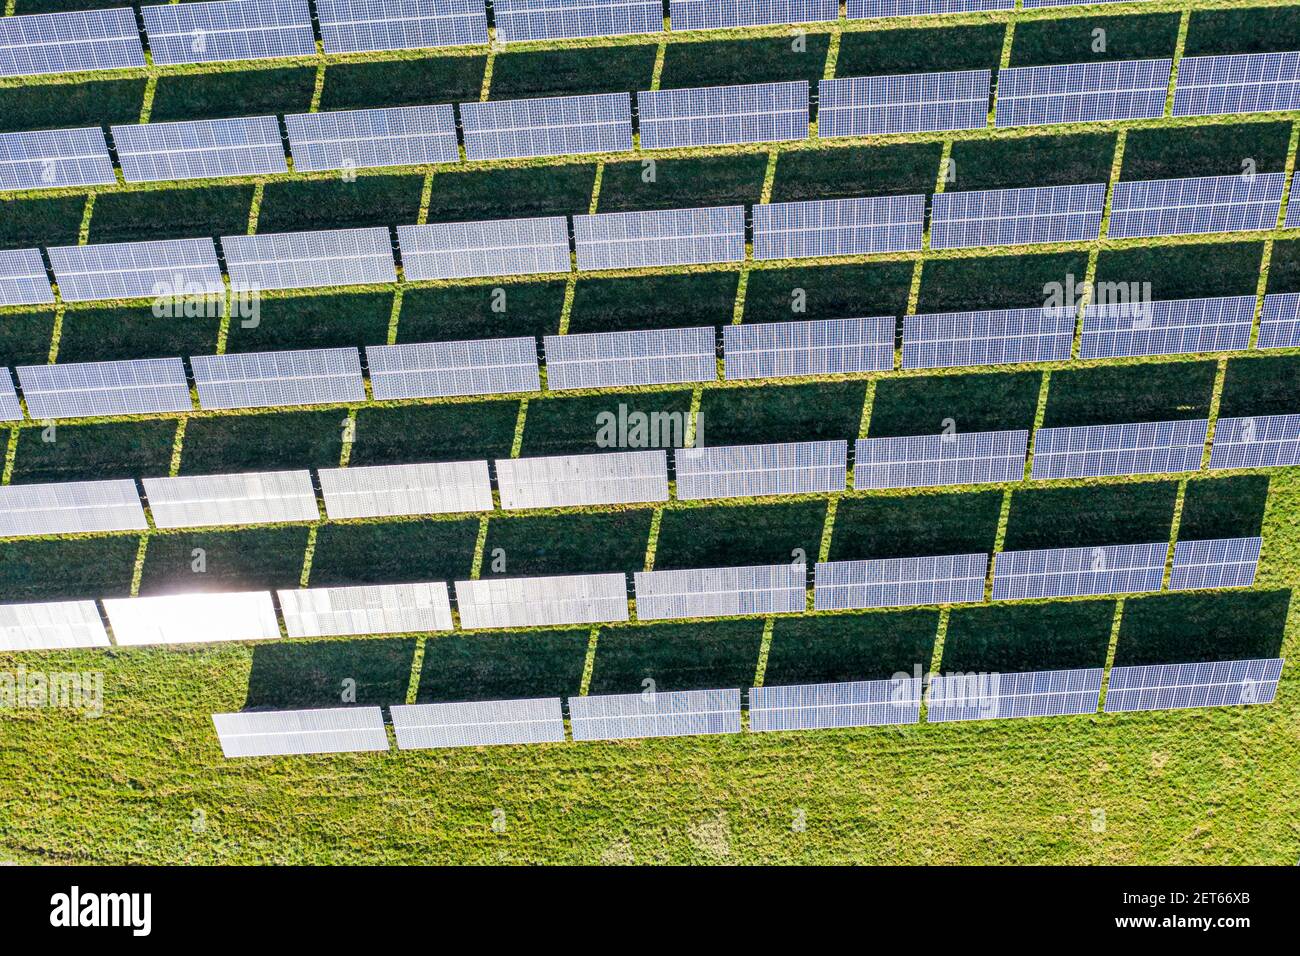 Aerial view of Solar farm with large solar panels in an array, West Sussex, England Stock Photo